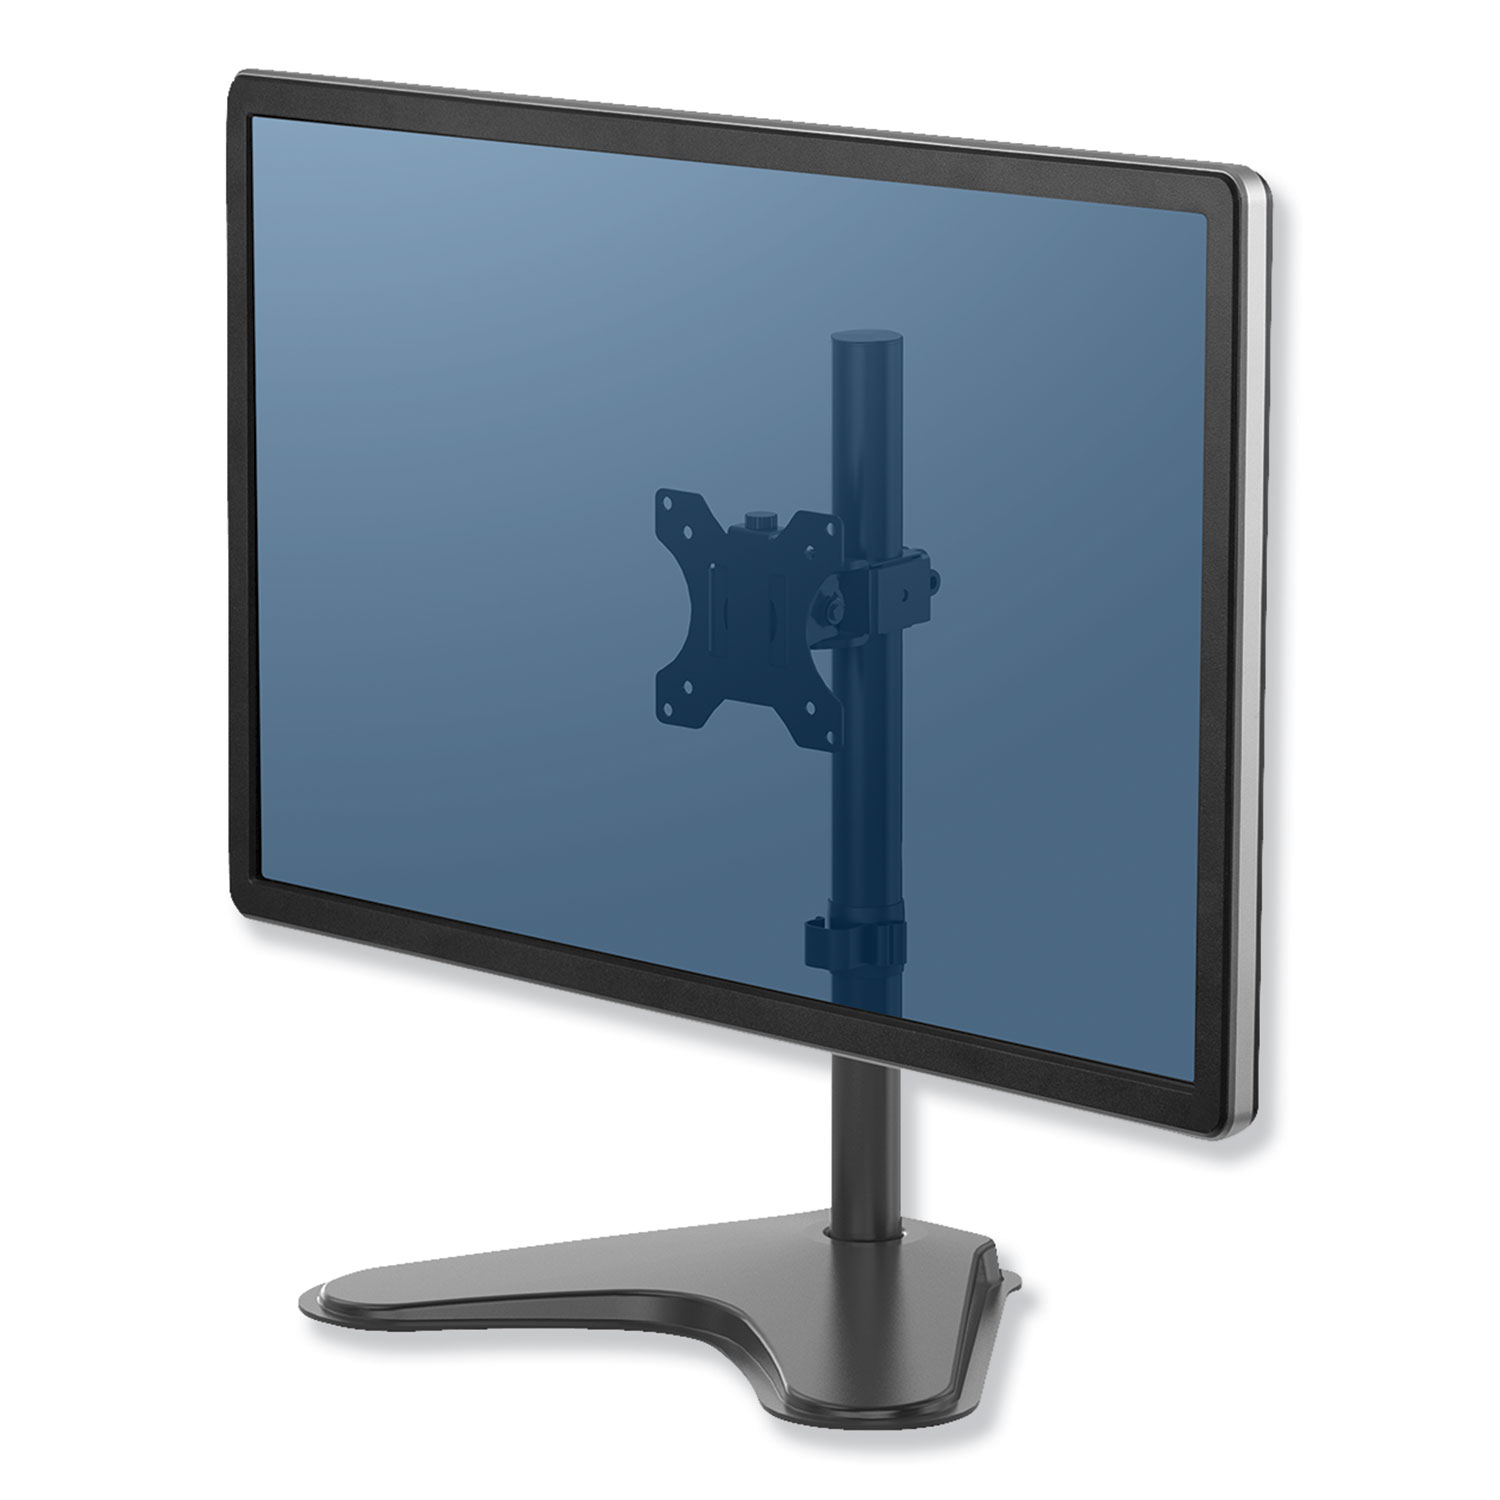 Professional Series Single Freestanding Monitor Arm, up to 32/17 lbs